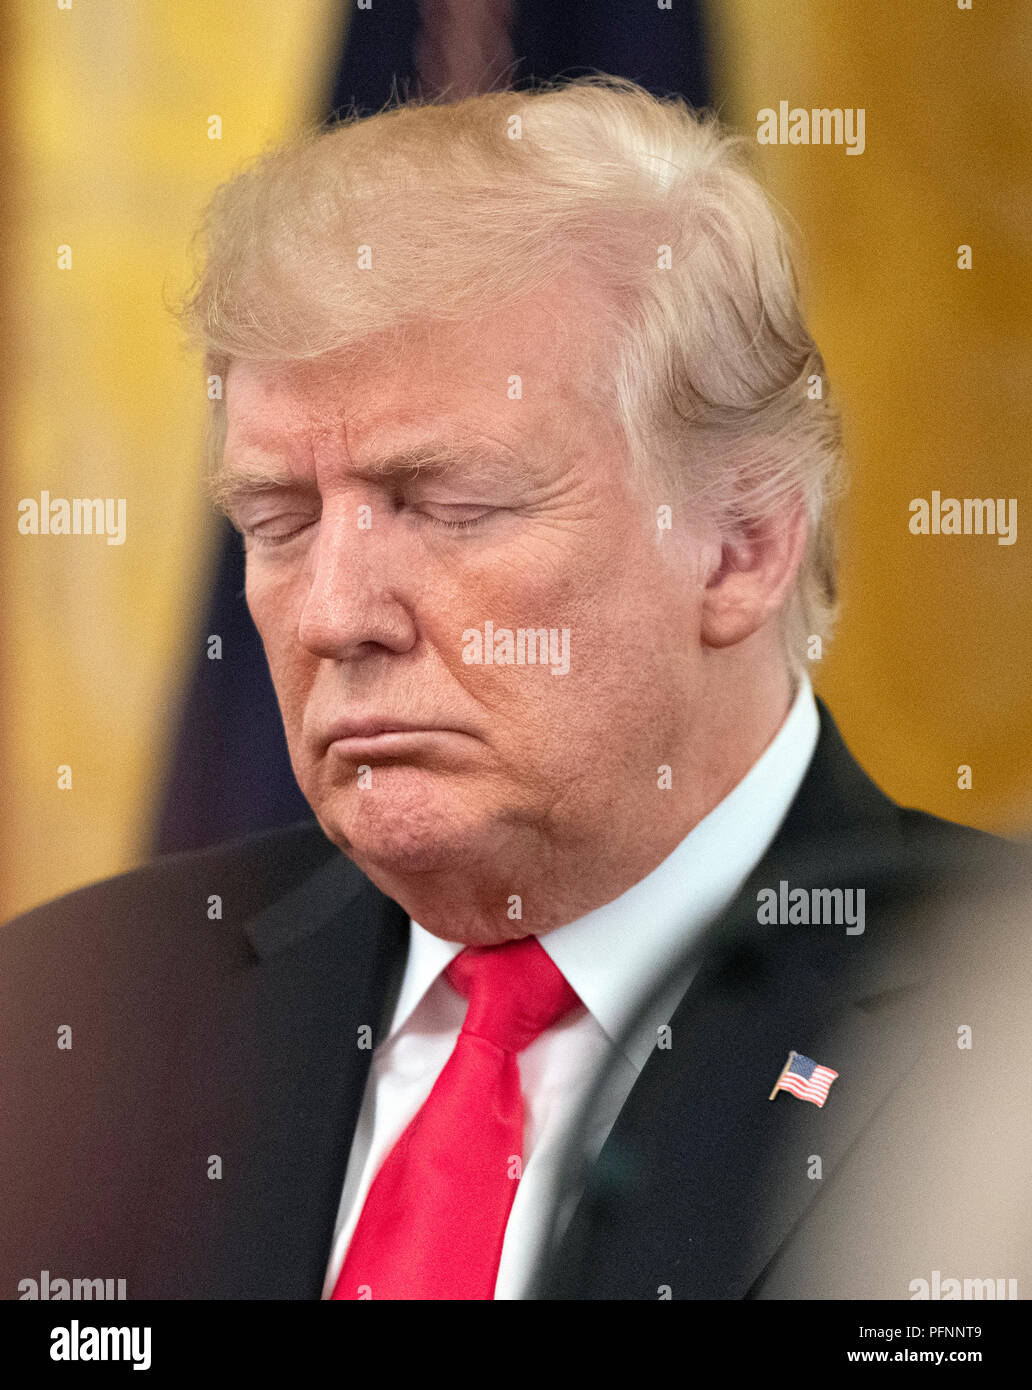 United States President Donald J. Trump bows his head in prayer prior to his making remarks as he awards the Medal of Honor posthumously to Technical Sergeant John A. Chapman, US Air Force, during a ceremony in the East Room of the White House in Washington, DC on Wednesday, August 22, 2018. Sergeant Chapman is being honored for his actions on March 4, 2002, on Takur Ghar mountain in Afghanistan where he gave his life to save his teammates. Credit: Ron Sachs/CNP | usage worldwide Stock Photo